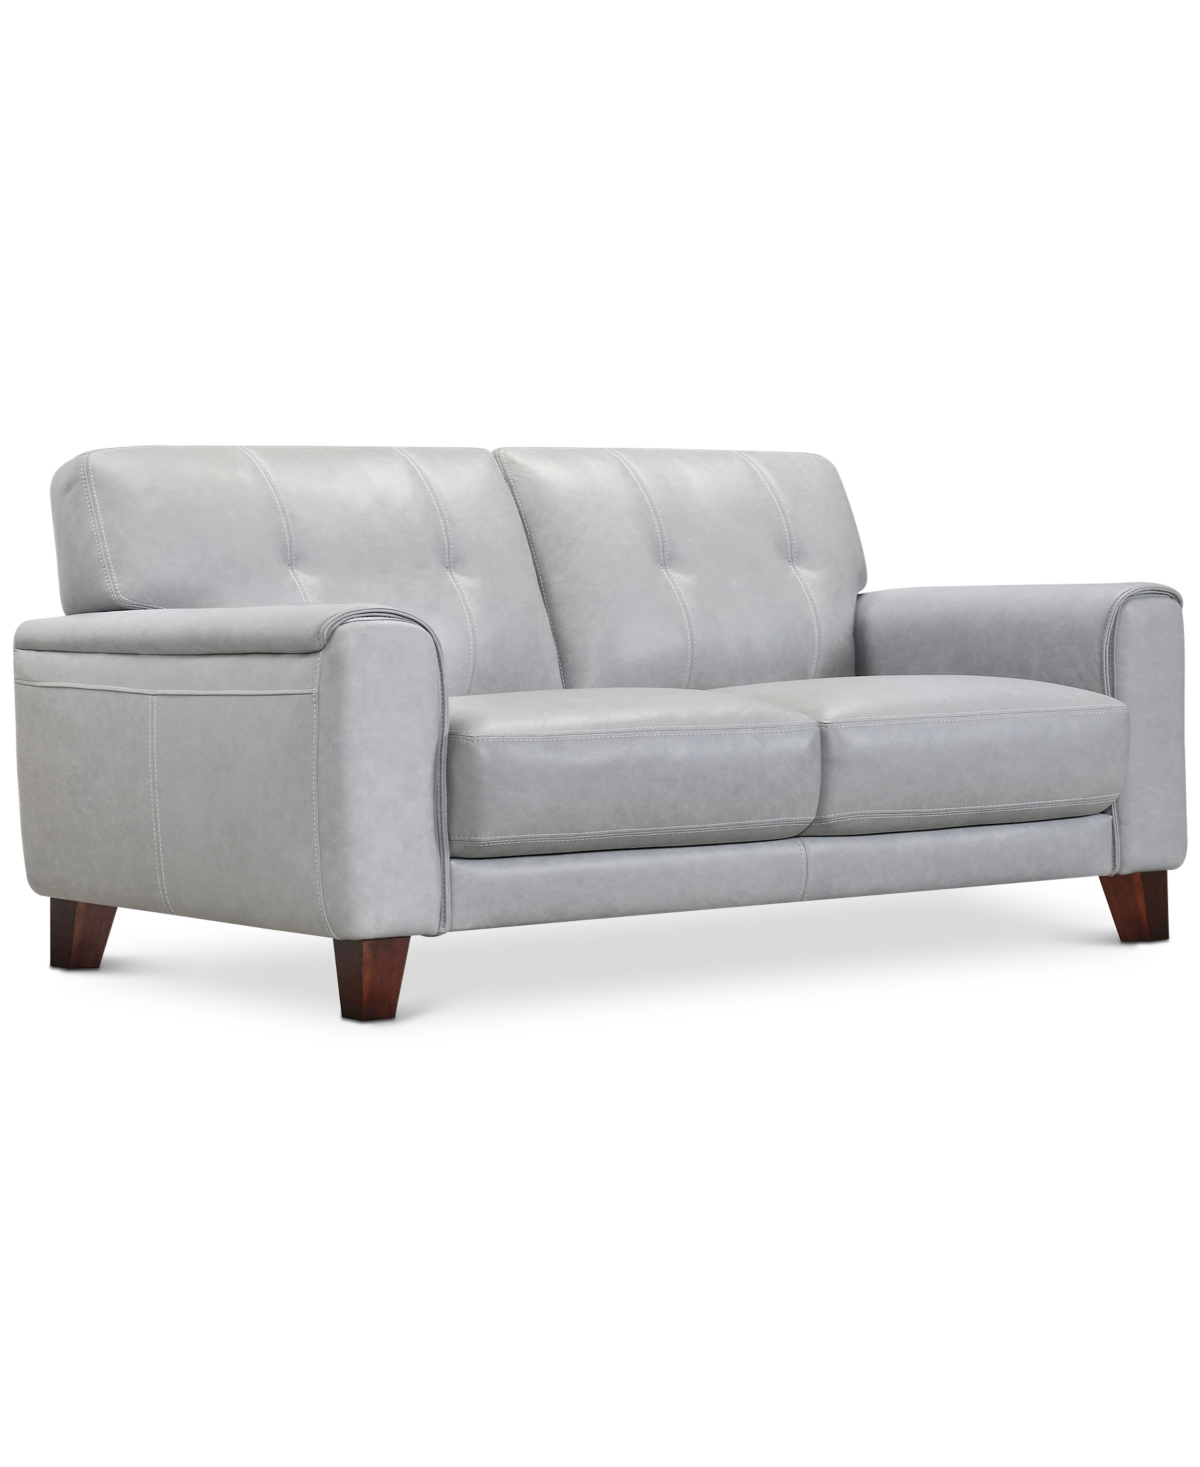 Furniture Ashlinn 81" Tufted Pastel Leather Sofa, Created For Macy's In Grey Mist